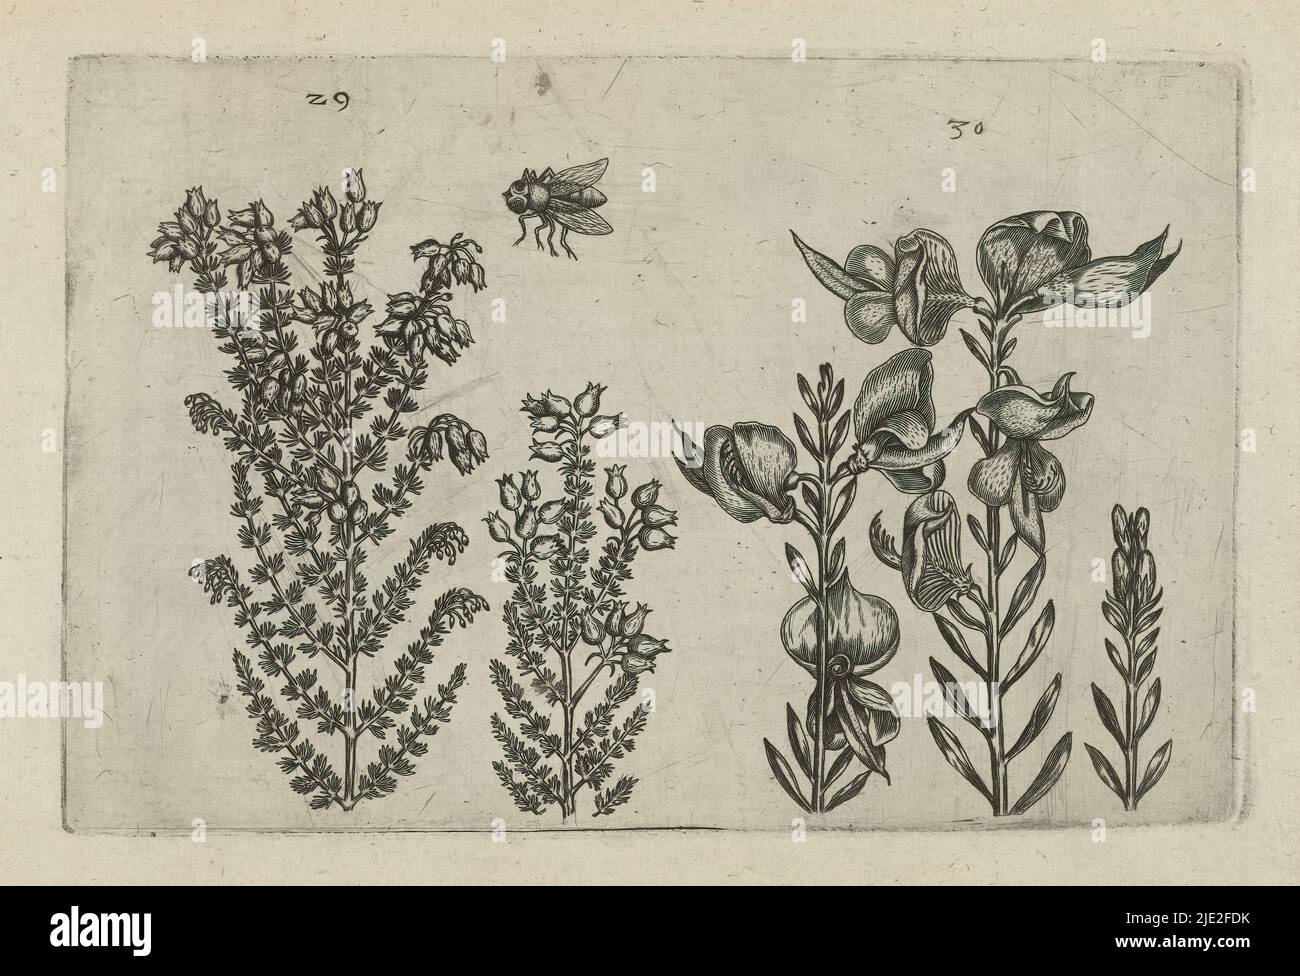 Common heath and broom bush, Cognoscite lilia (series title), Common heath (Erica tetralix) and broom bush (Spartium junceum), numbered 29 and 30. In the middle above a bee., print maker: Crispijn van de Passe (I), (attributed to), after drawing by: Crispijn van de Passe (I), (attributed to), publisher: Crispijn van de Passe (I), print maker: Cologne, after drawing by: Cologne, publisher: Cologne, publisher: London, 1600 - 1604, paper, engraving, height 127 mm × width 205 mm, height 172 mm × width 272 mm Stock Photo